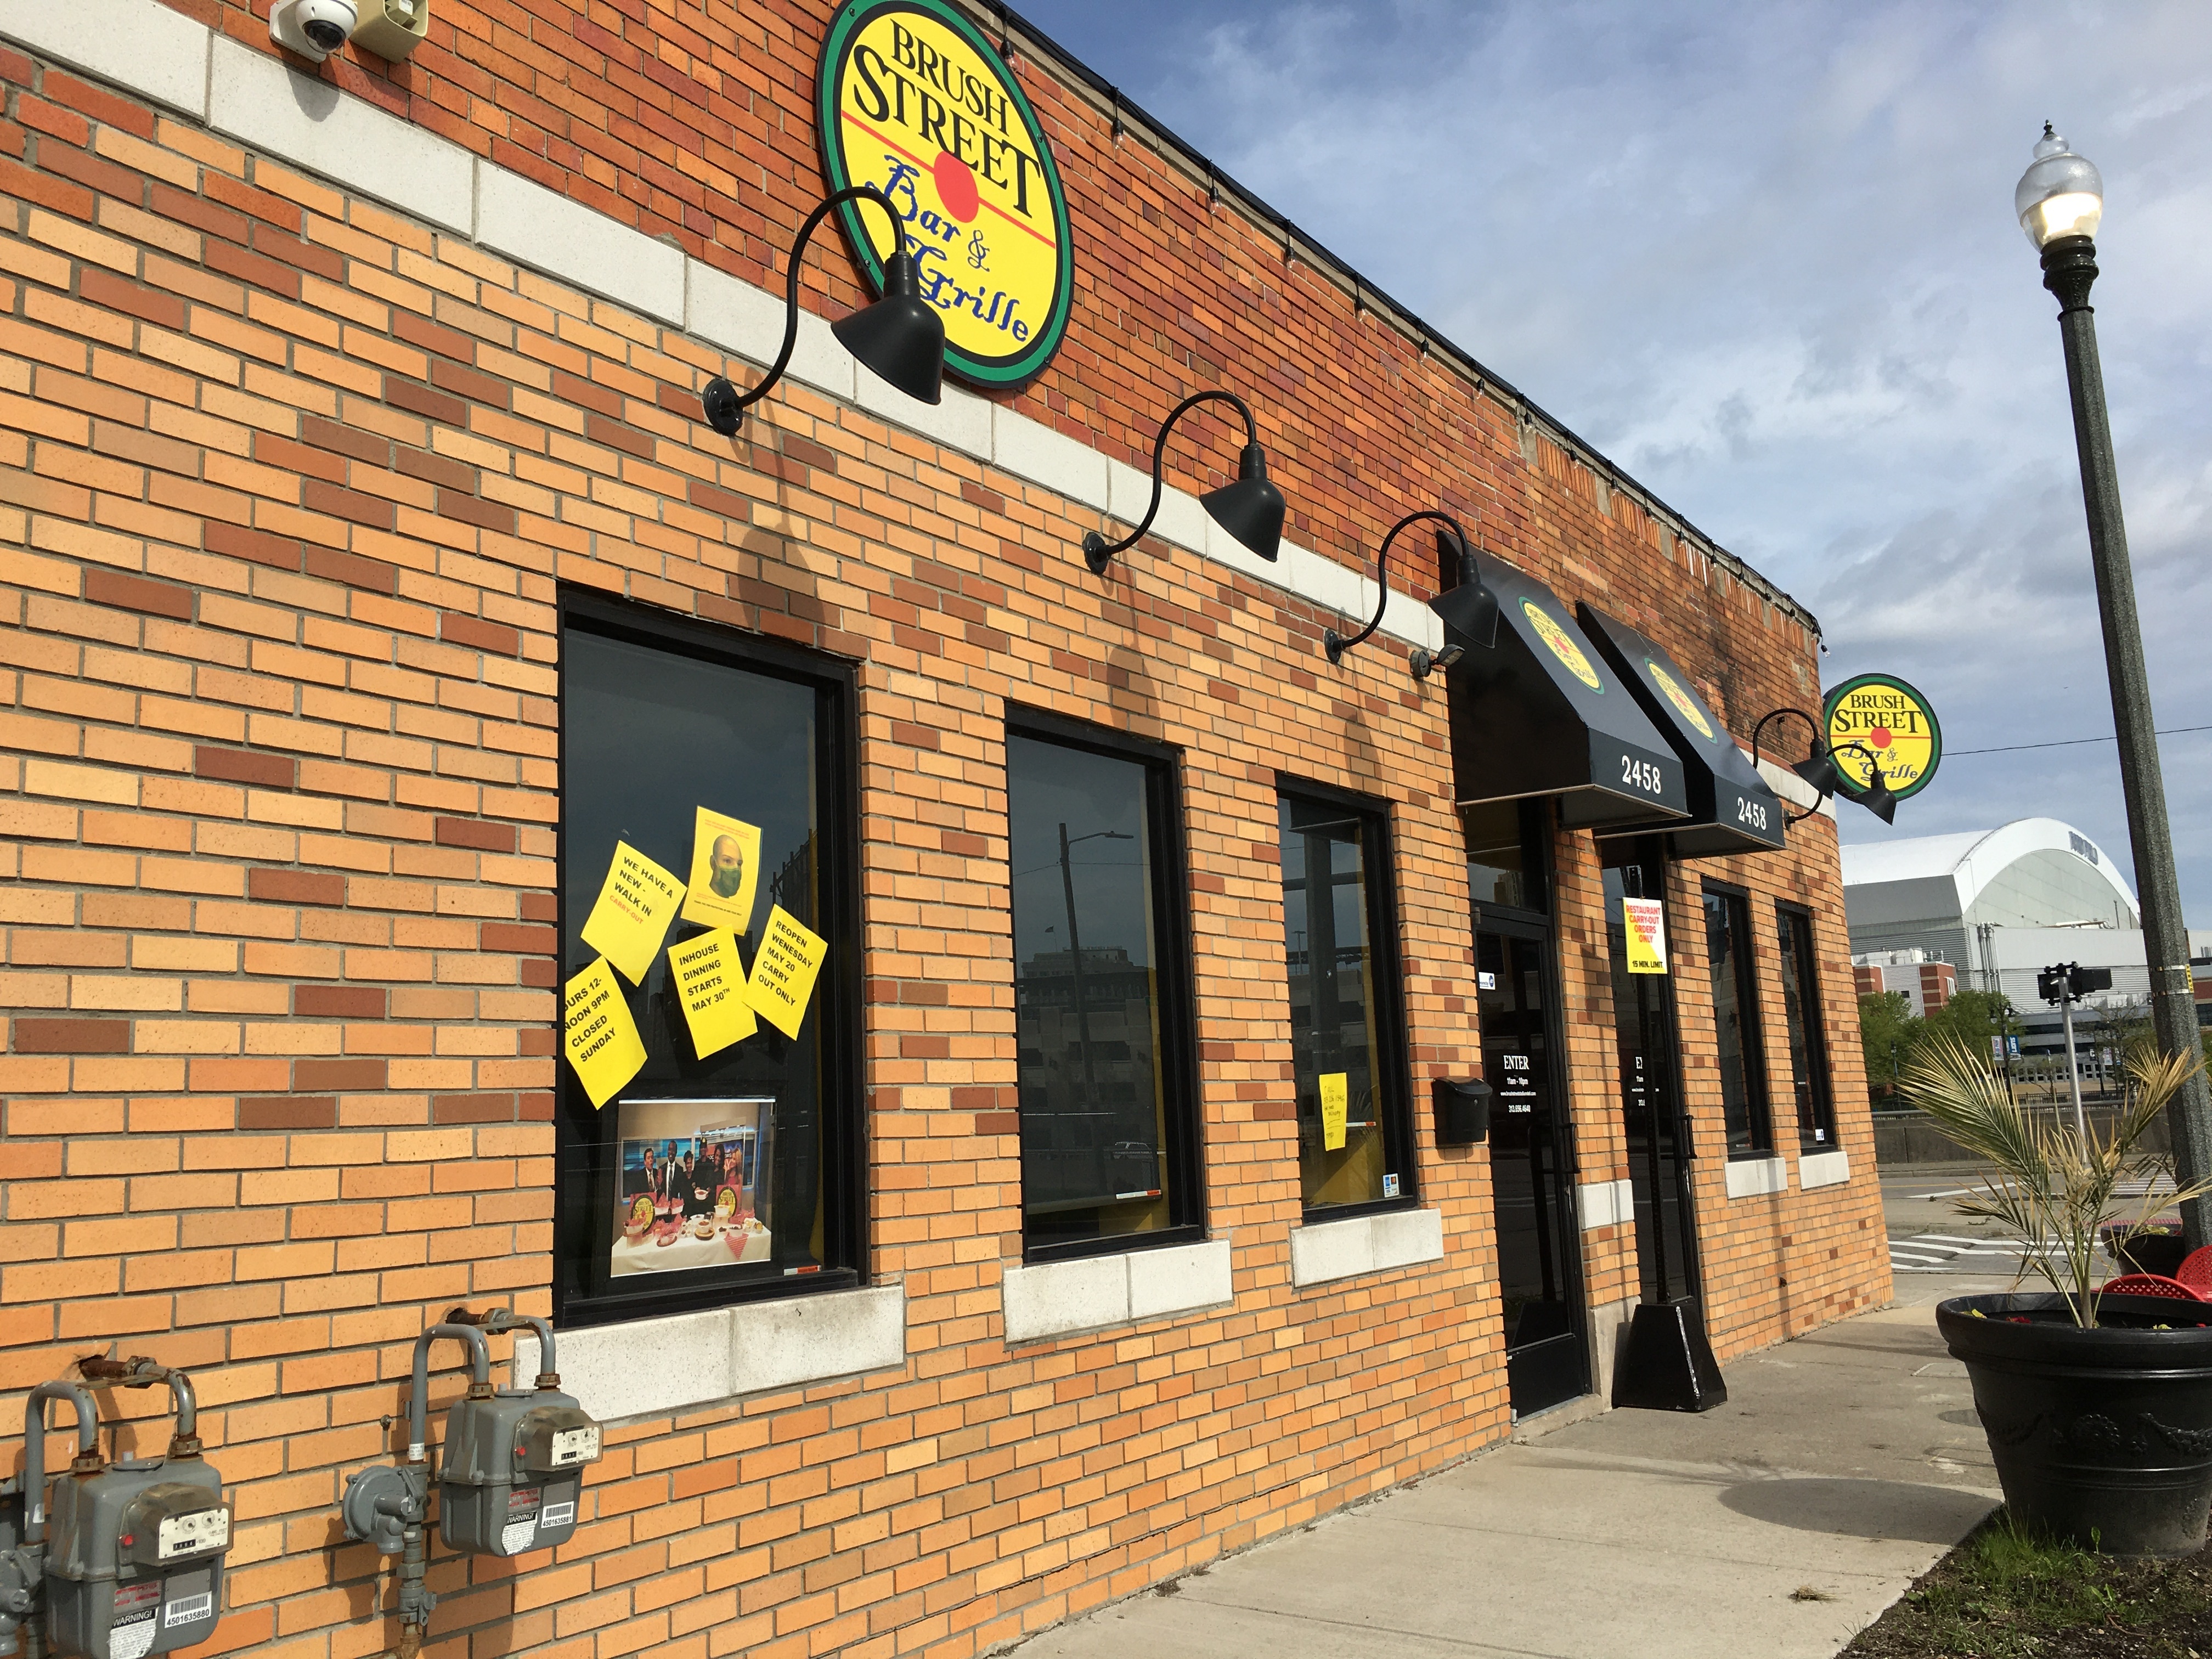 Brush Street Bar &amp; Grille is located in a brick building with a curved corner storefront. The restaurant is shown on a sunny day with yellow paper signs plastered in the windows related to coronavirus operations.